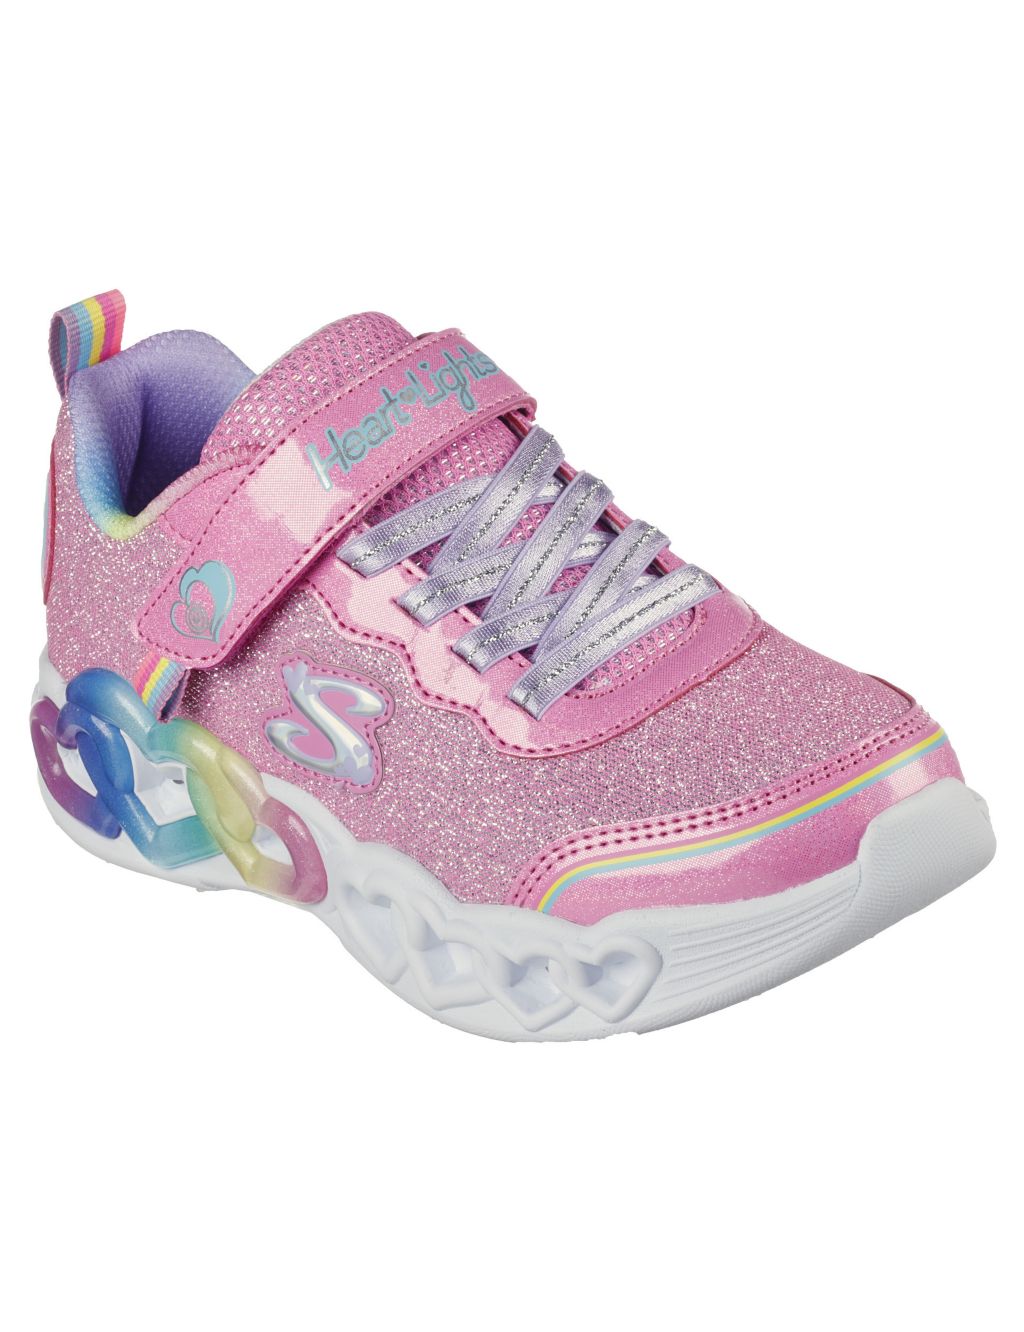 Infinite Heart Lights Love Prism Trainers (9.5 Small - 3 Large) image 2